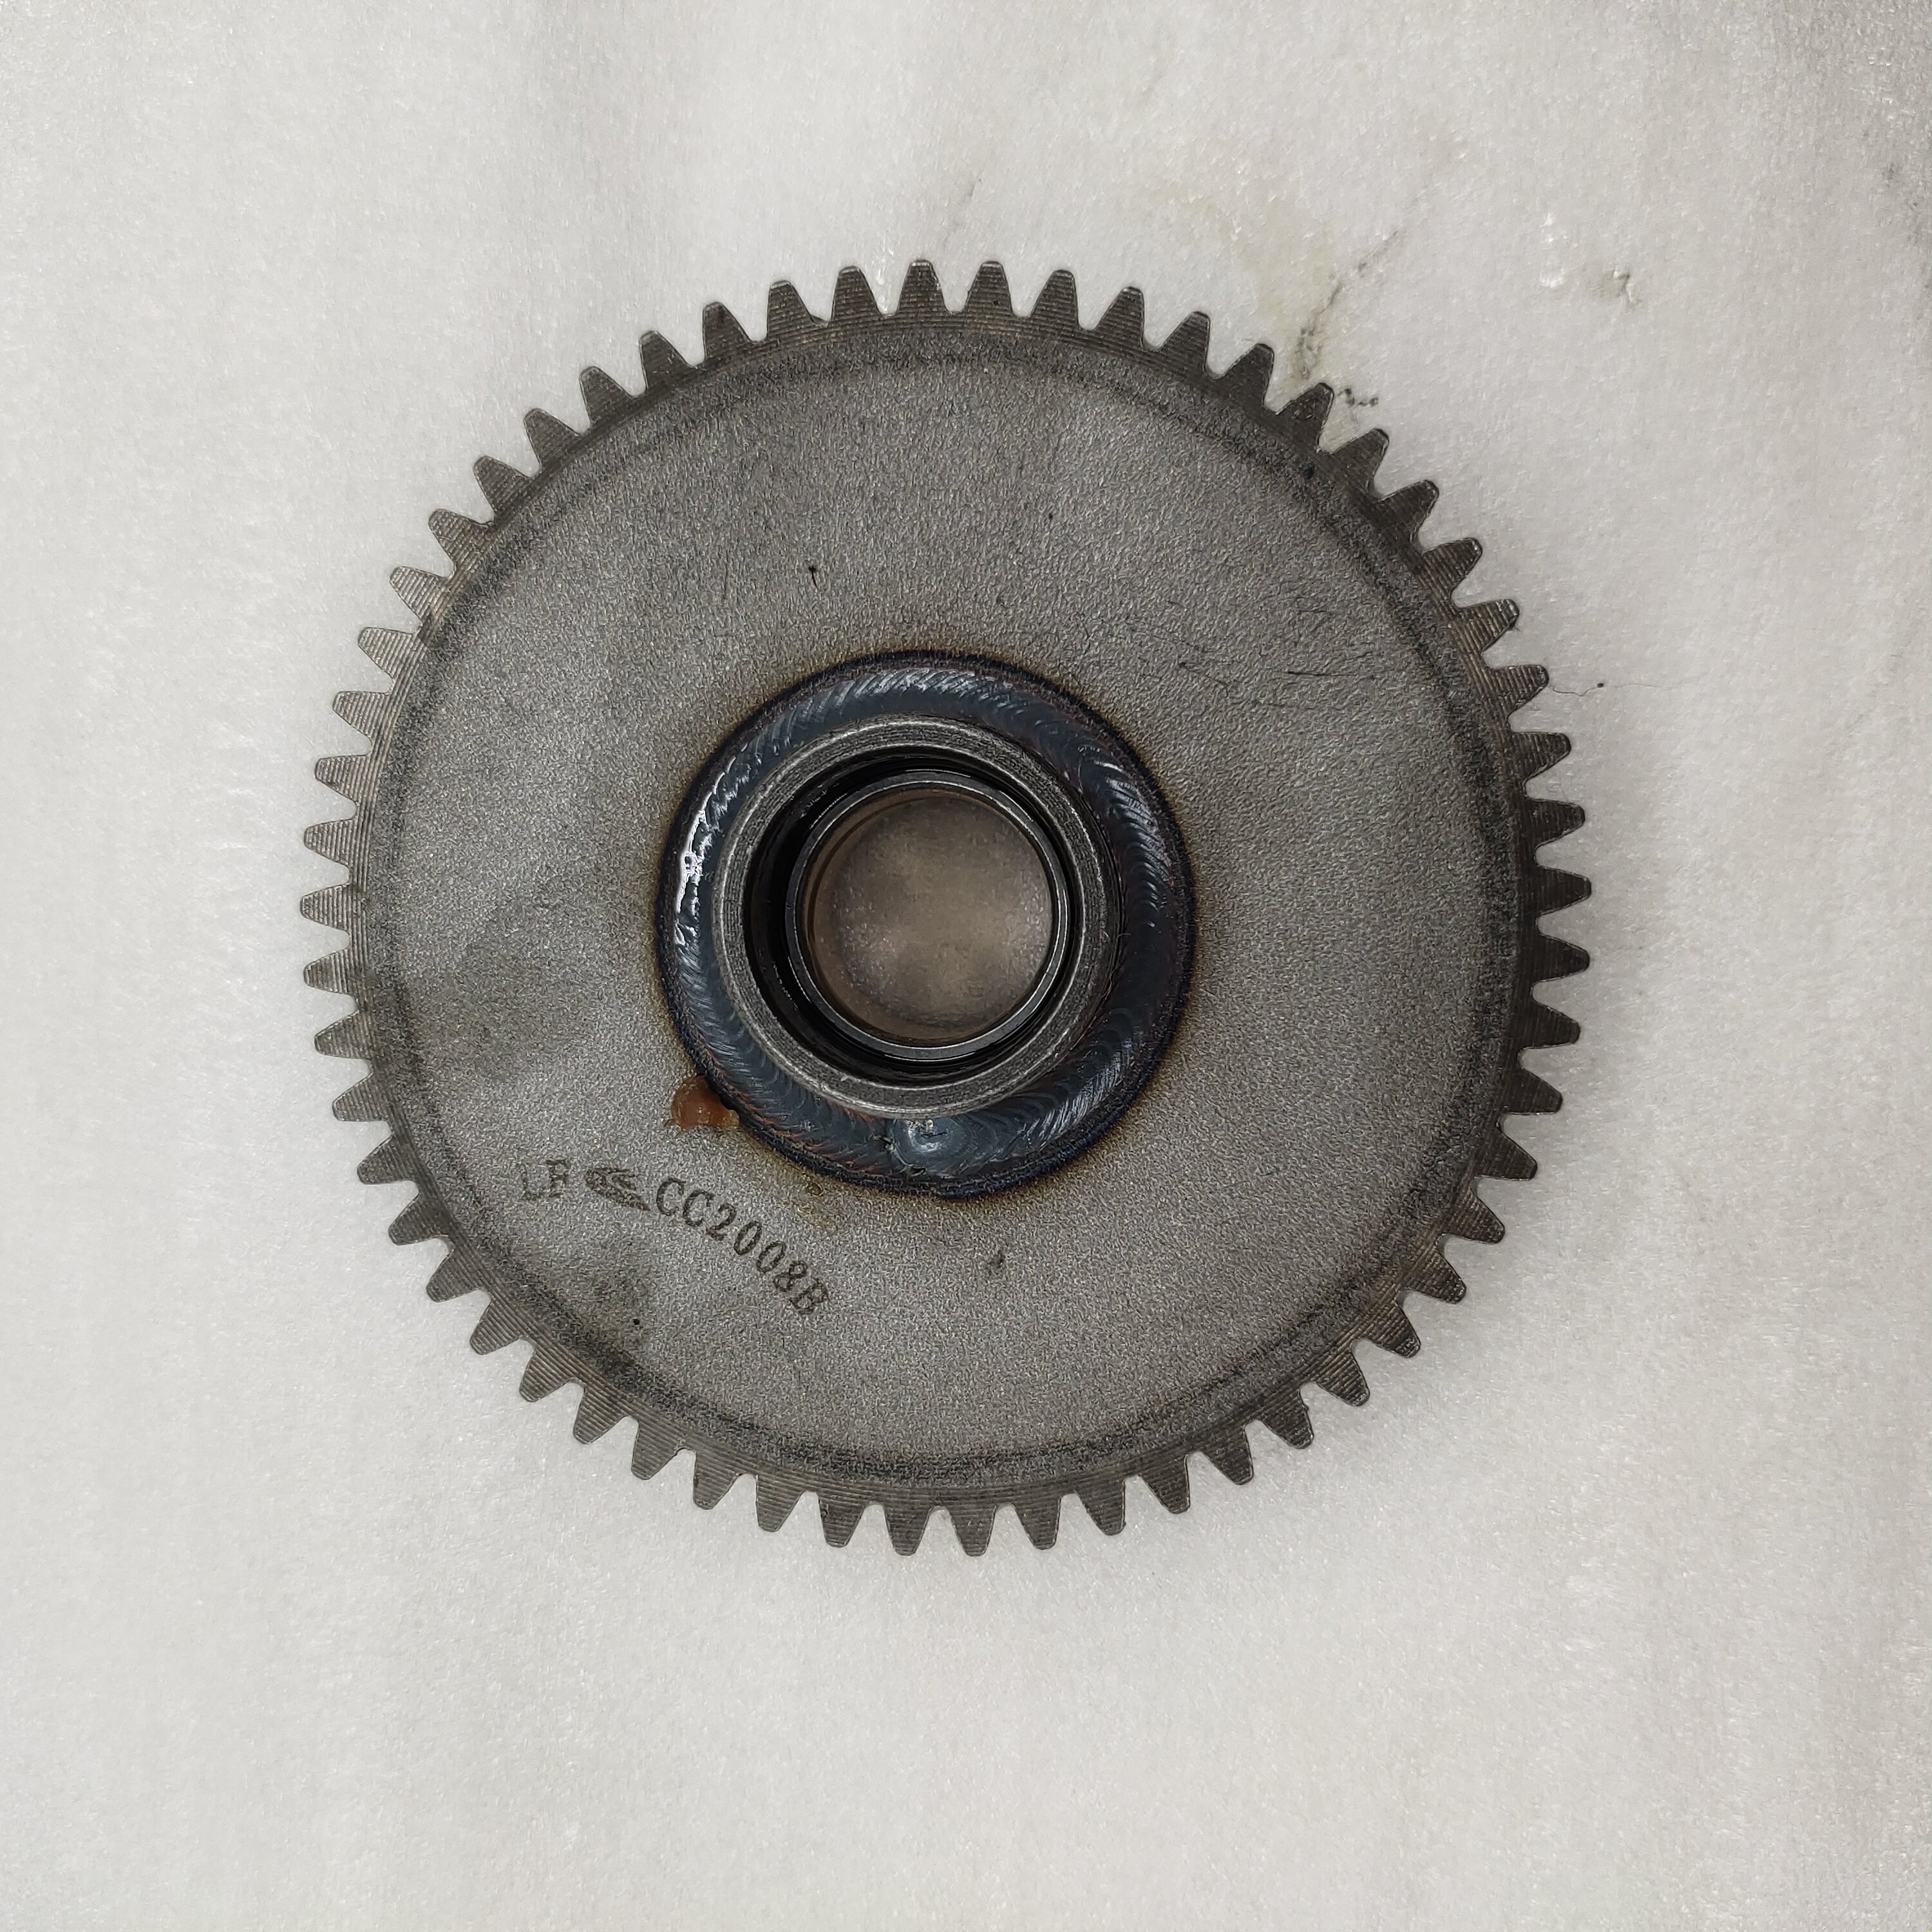 DAYANG  Made Spur Double Plate Gear Disk for Motorcycle Transmission Parts